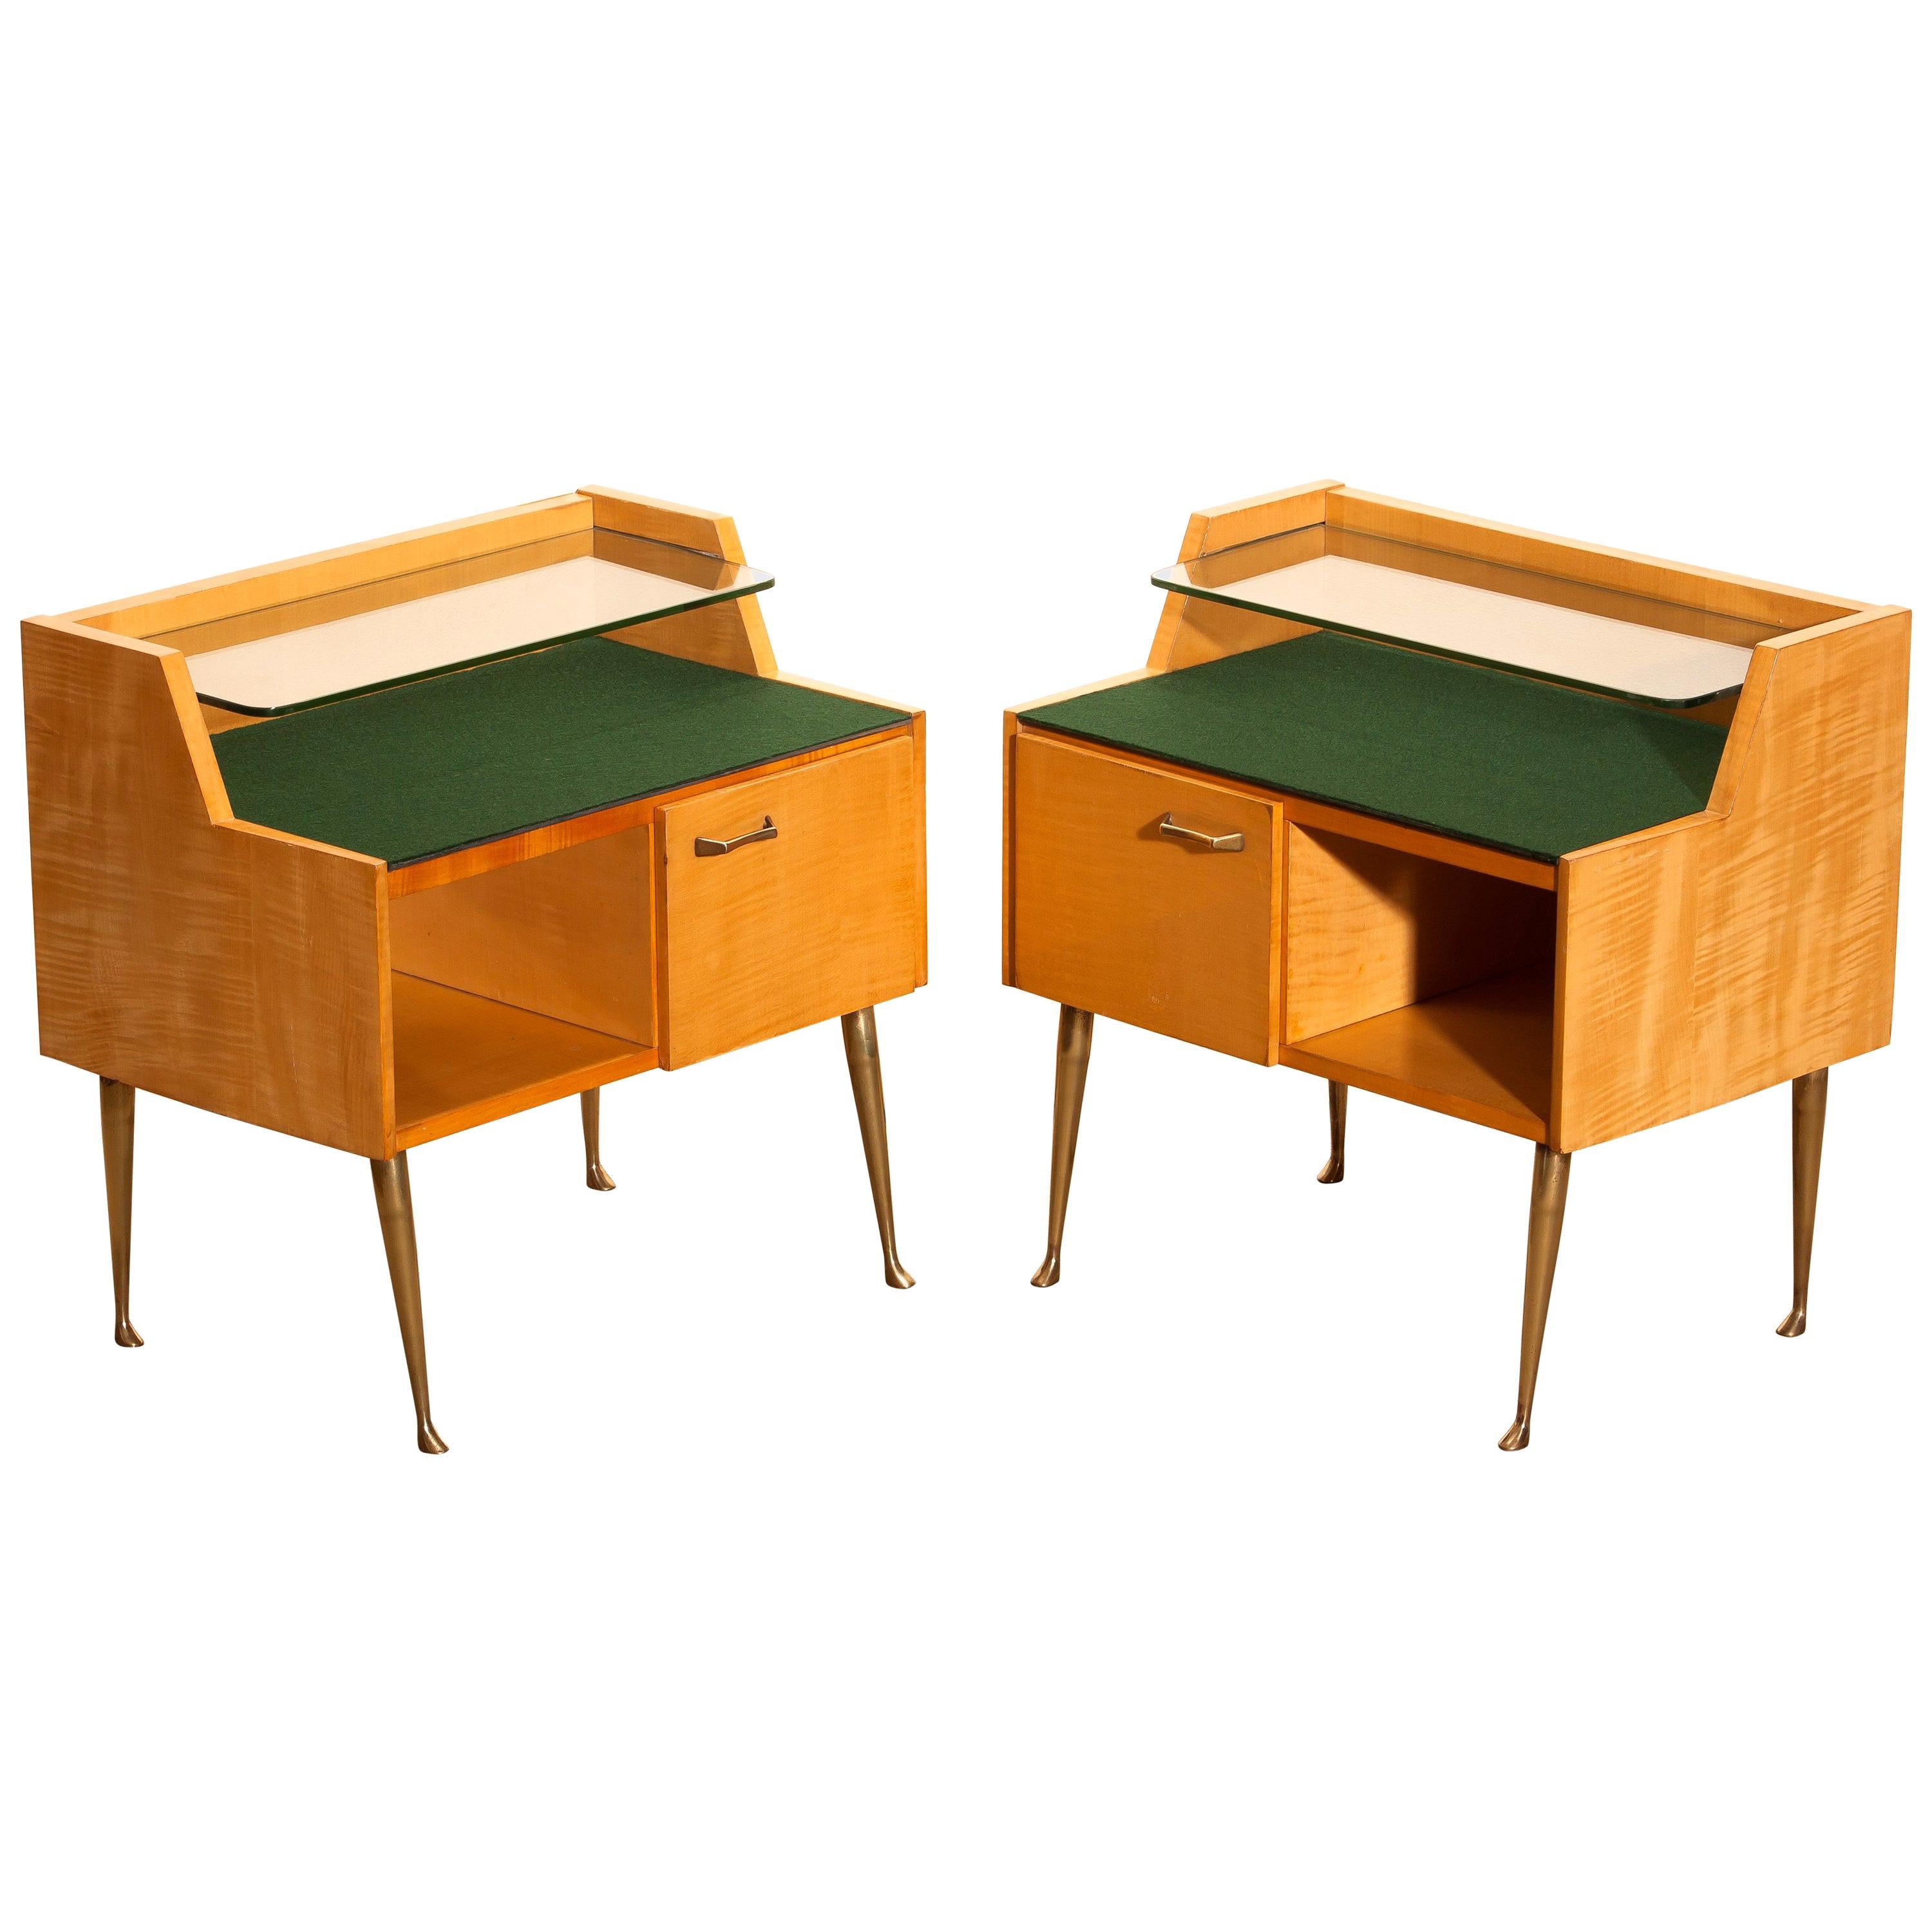 Beautiful set of two Italian midcentury bedside tables in maple with brass legs and brass handle designed by Paolo Buffa, Italy, 1950s.
Both are in good condition.
The top is covered with green felt and in addition, there's a smaller glass shelf